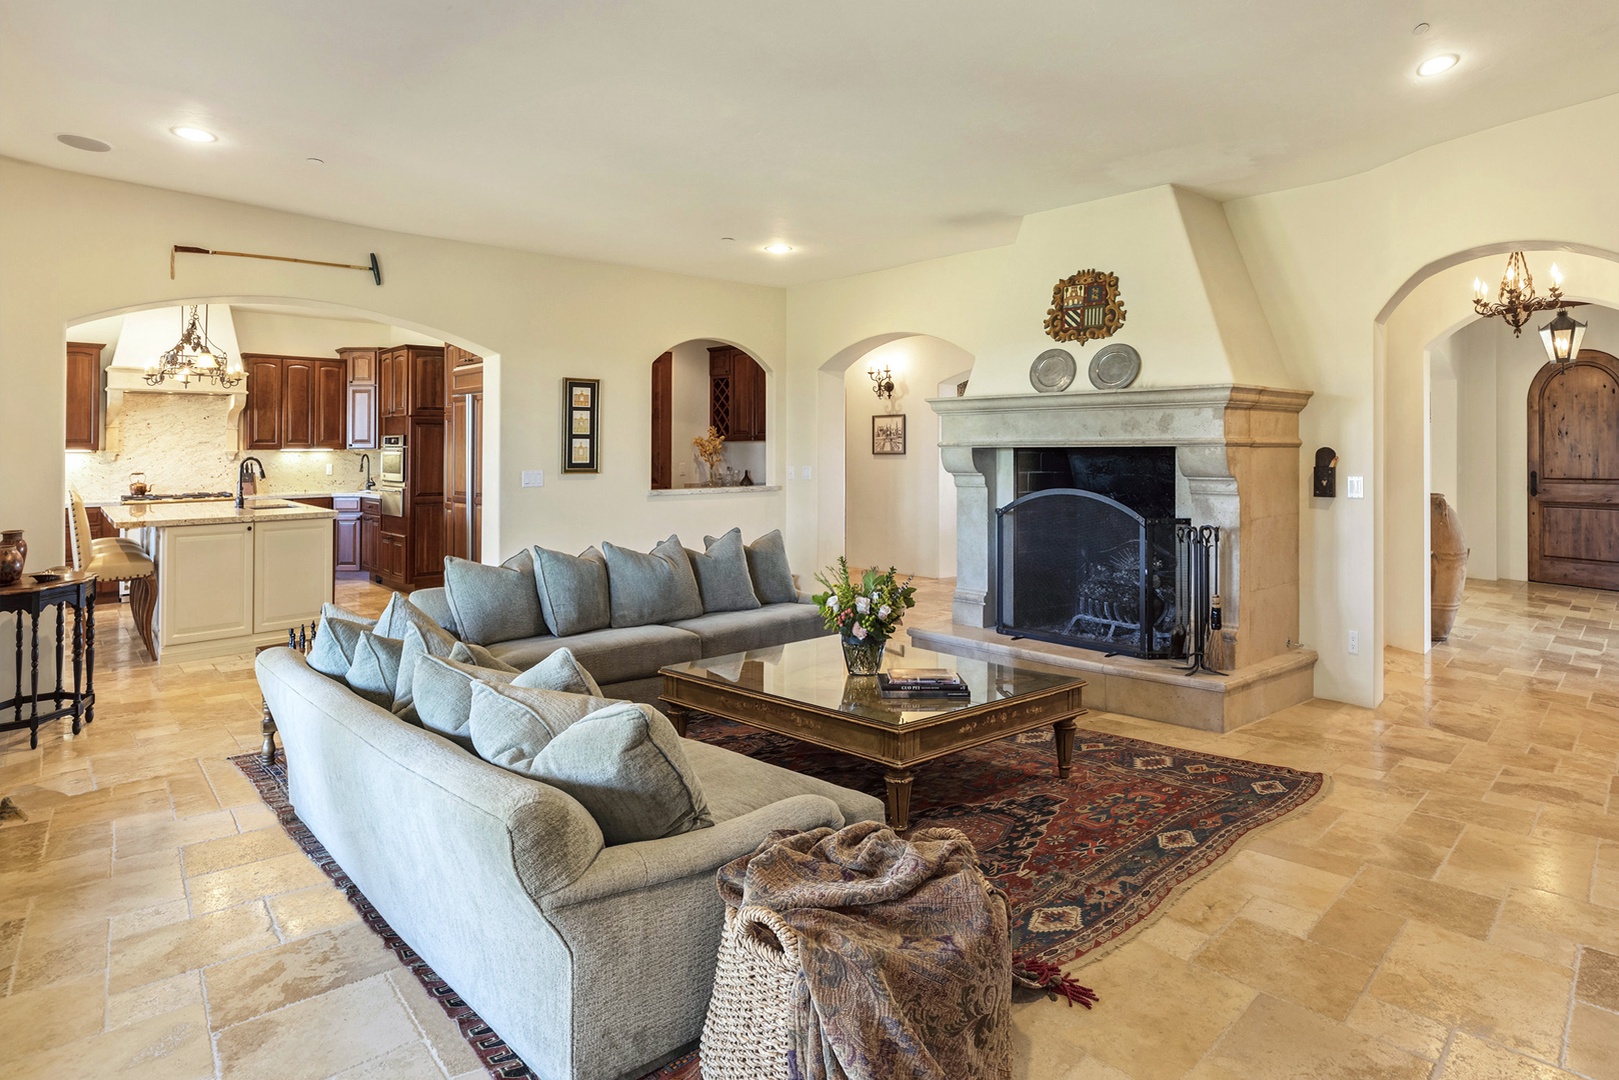 Fairfield Vacation Rentals, Villa Capricho - The living area and family room offer comfortable seating and breathtaking views of the vineyards